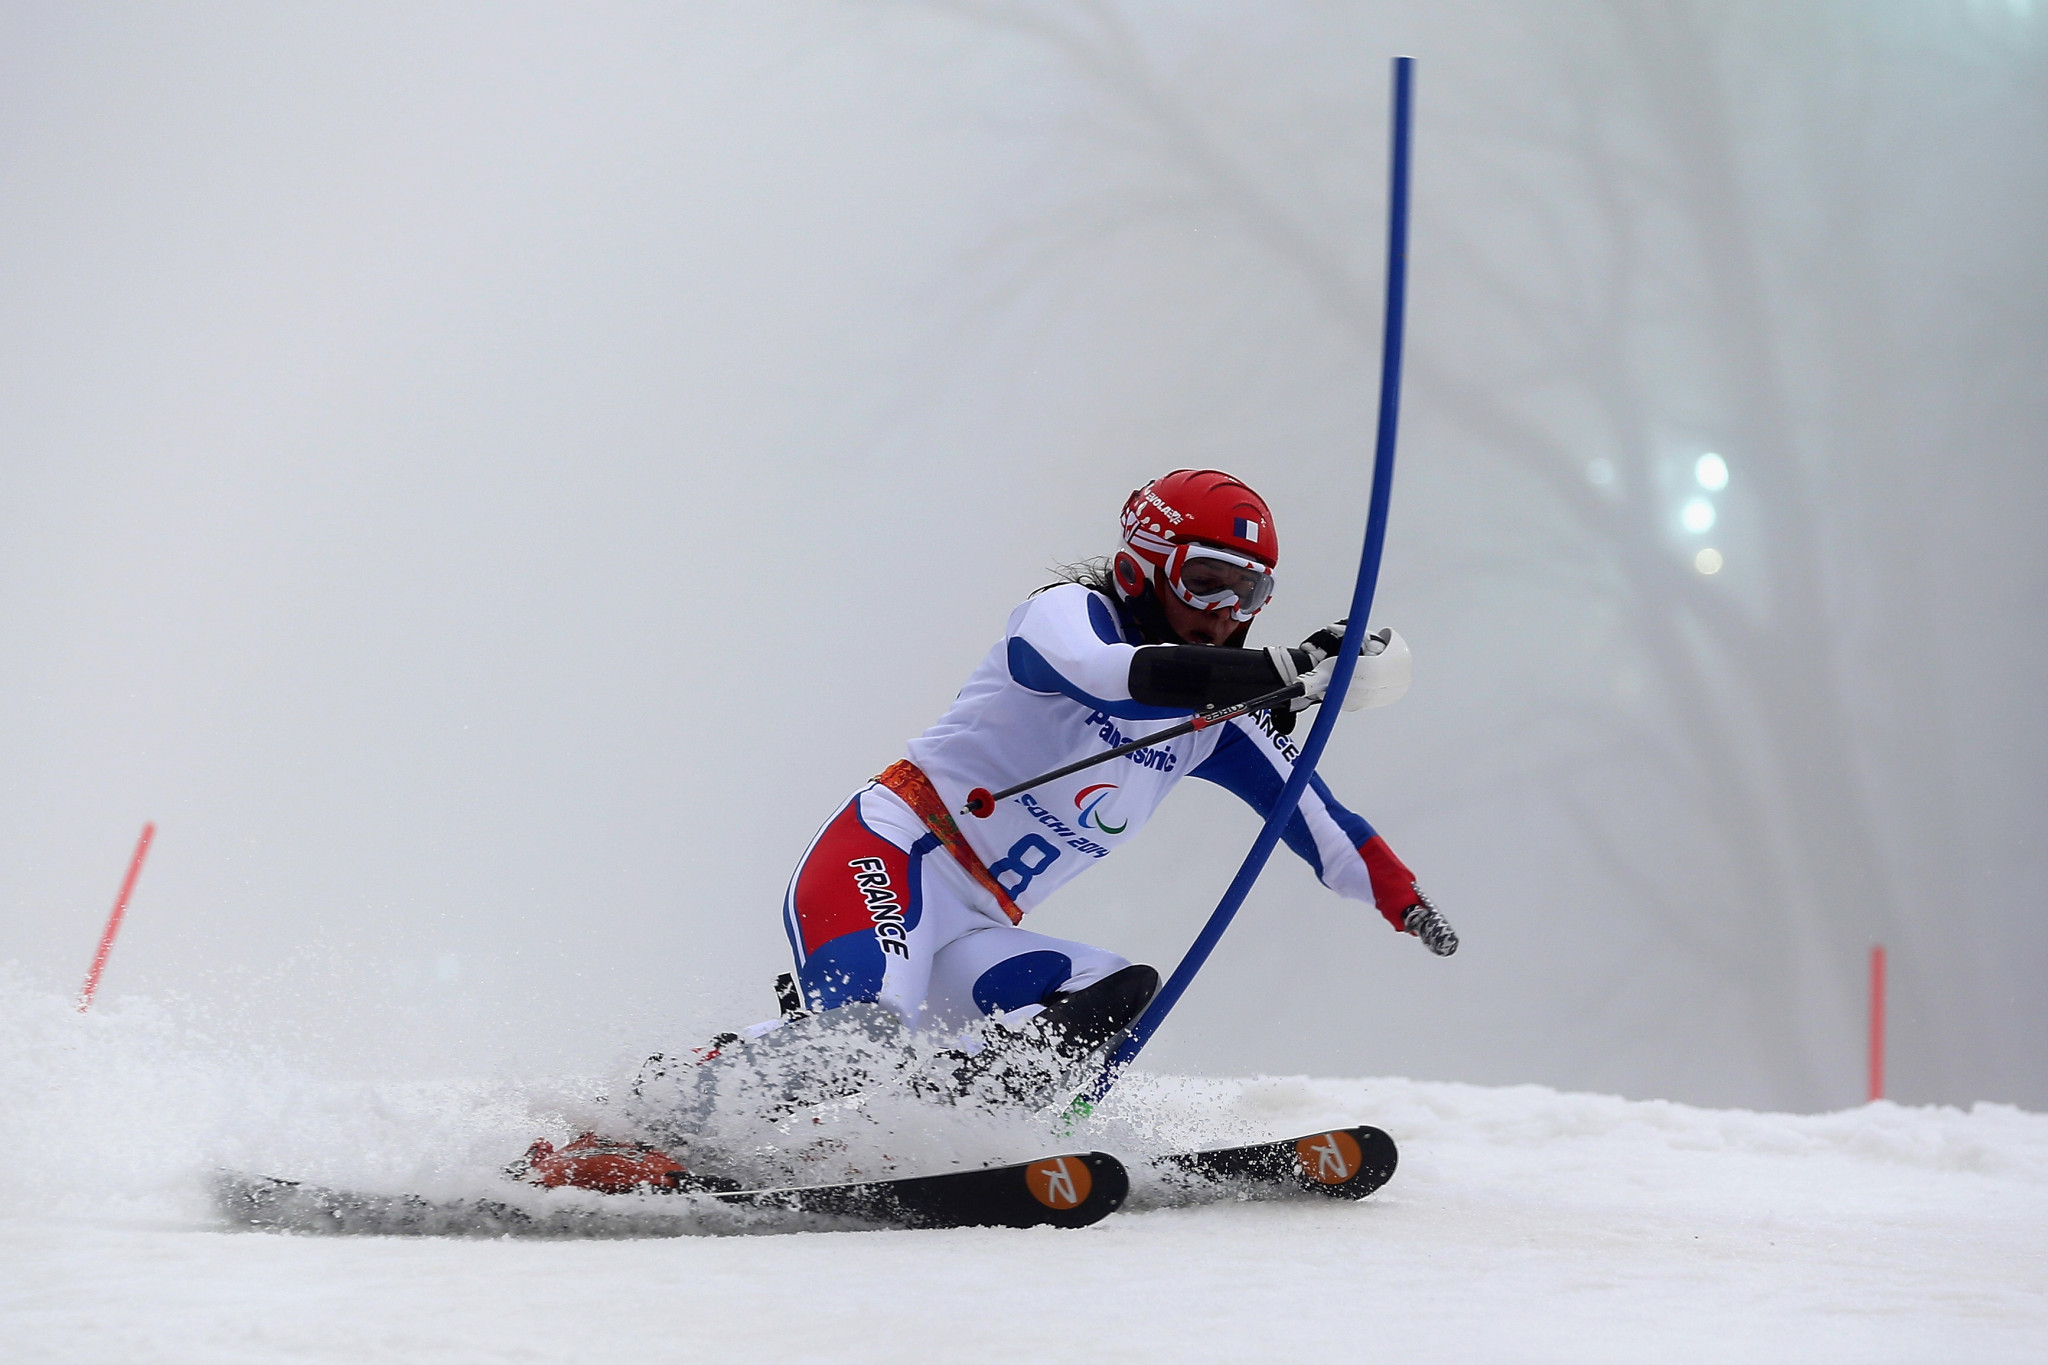 Marie Bochet claimed the women's standing gold medal for hosts France today at the World Para Alpine Skiing World Cup Finals in Morzine ©Getty Images